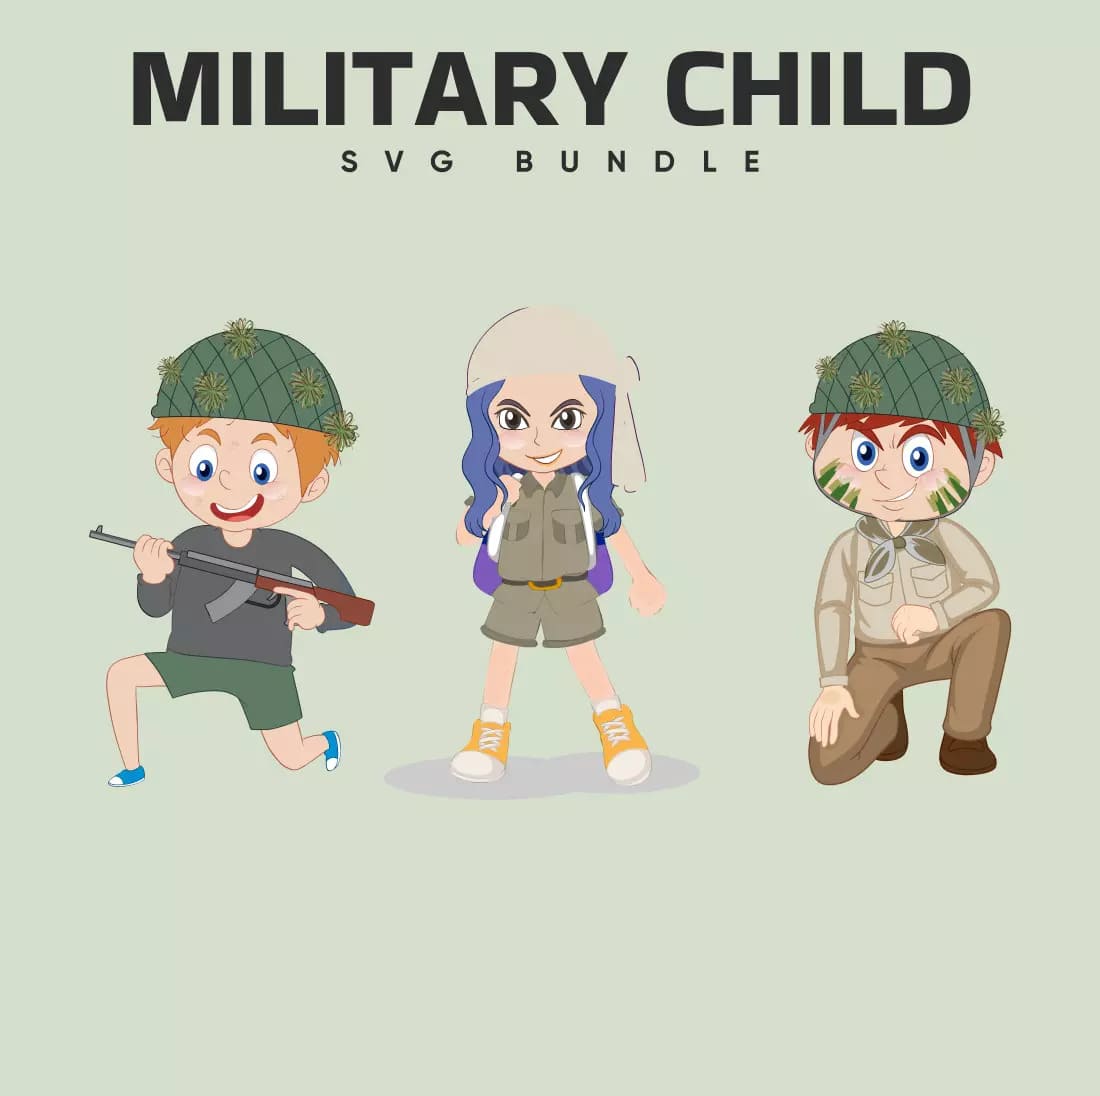 Military Child SVG Bundle Preview.